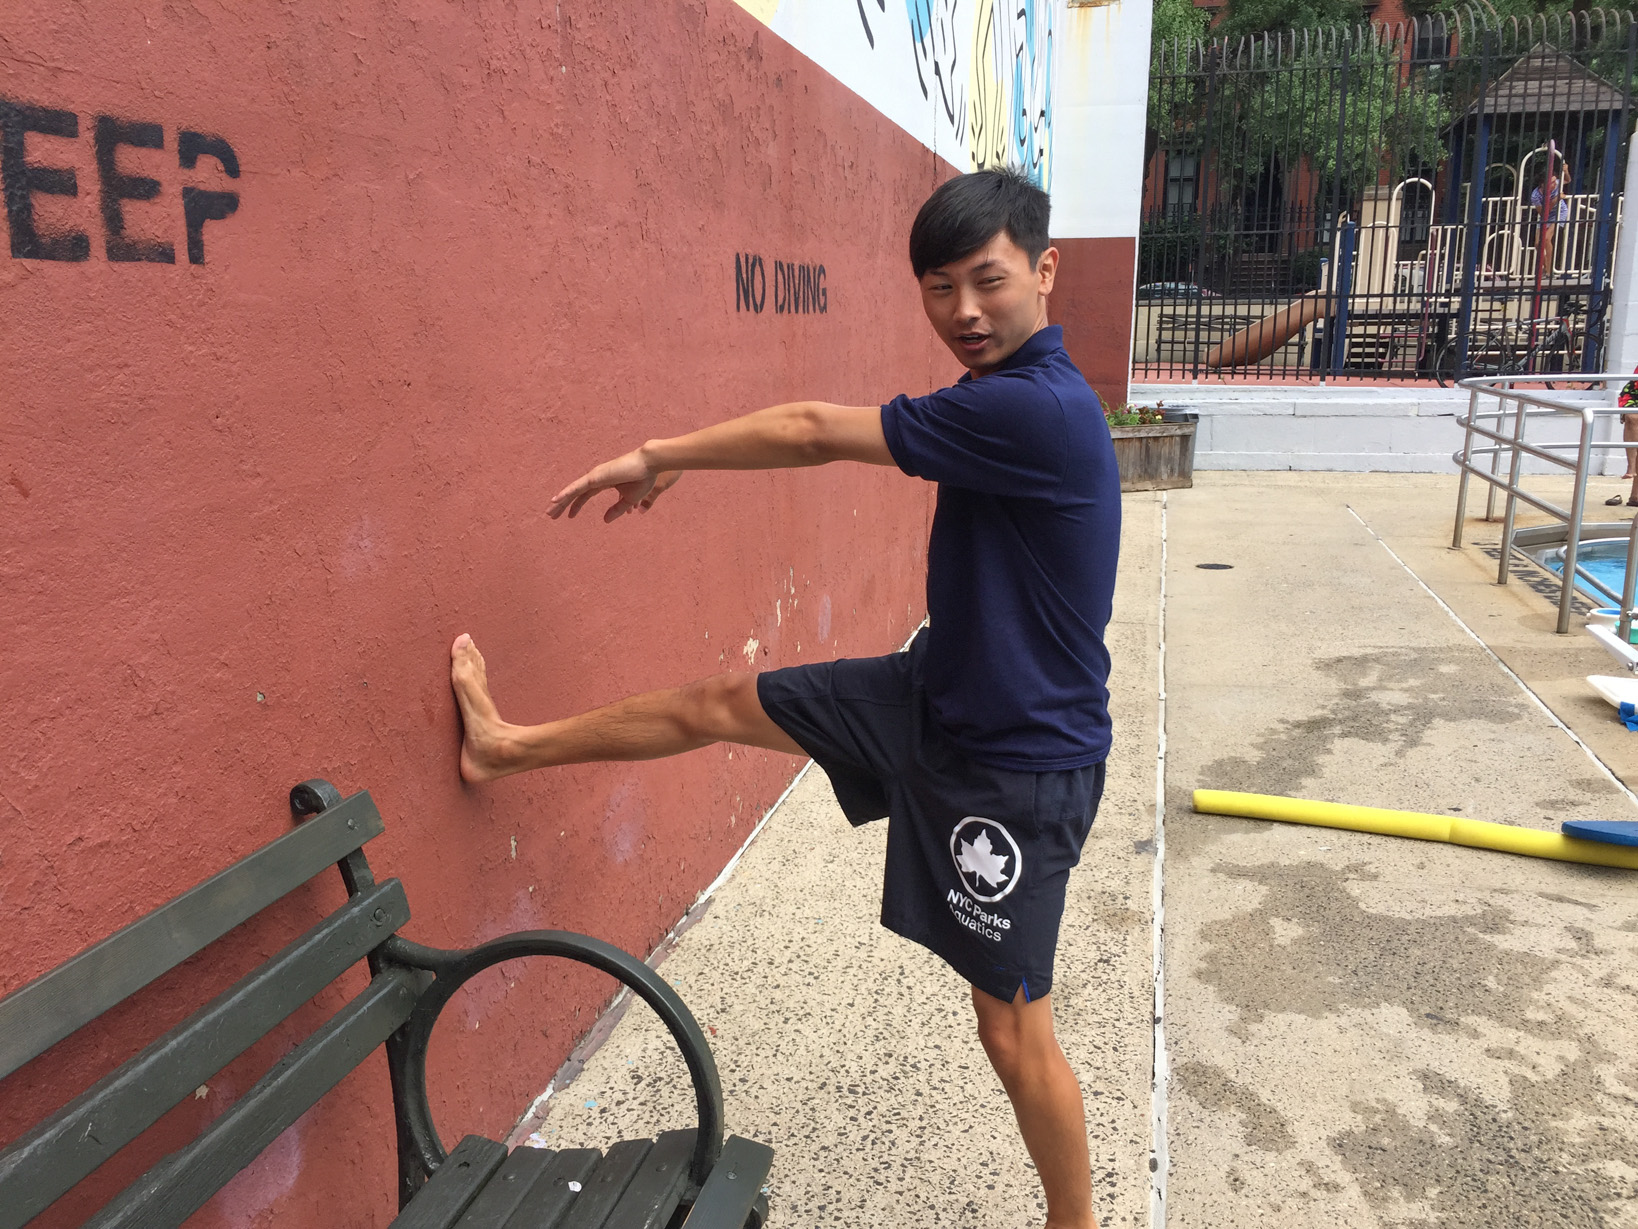 Huang demonstrates proper technique for an exercise against the poolside.